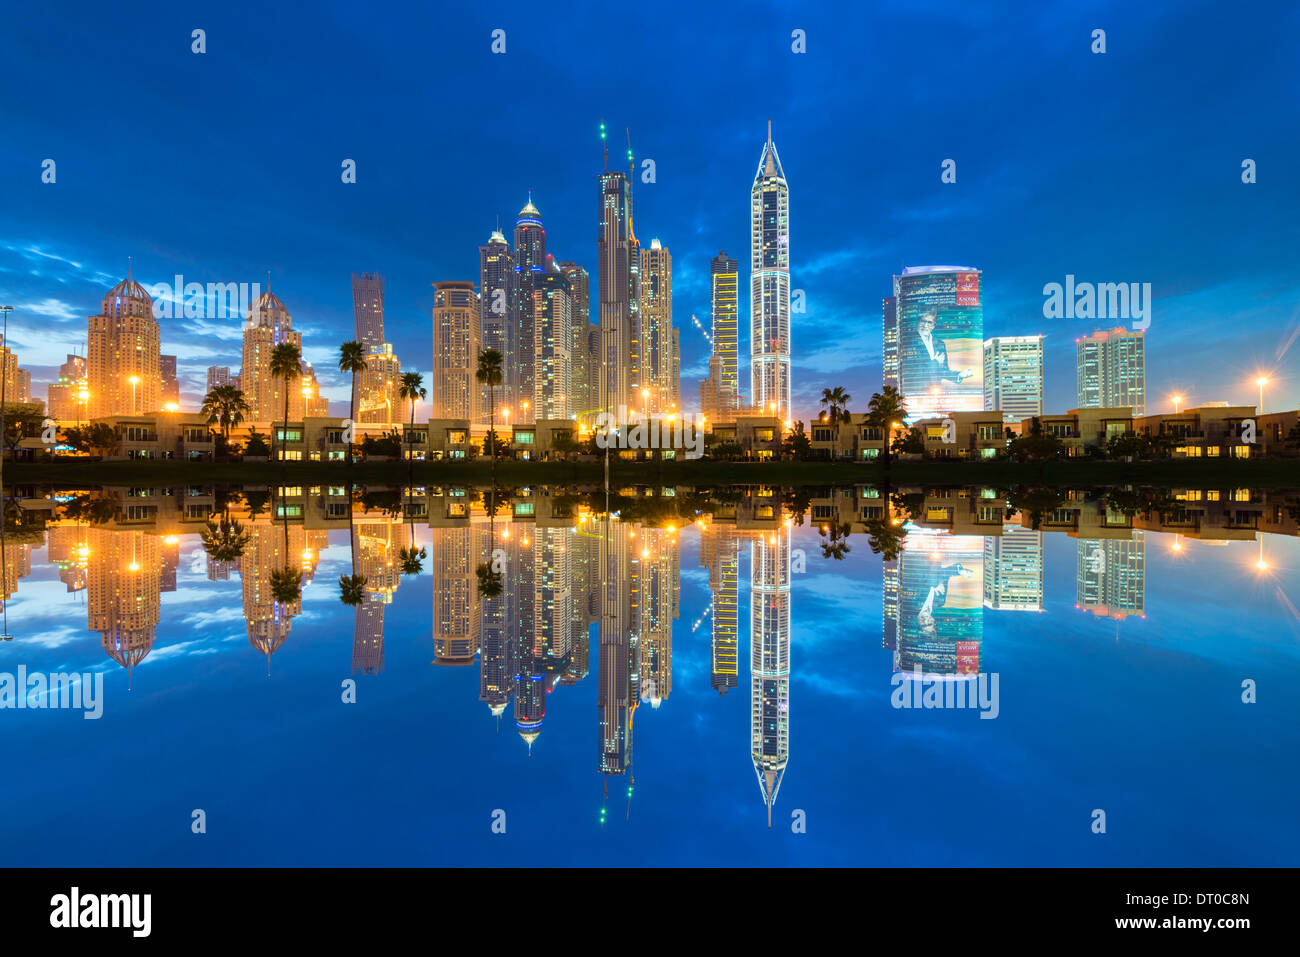 Night skyline of high-rise apartment and office towers in new Dubai Marina district in United Arab Emirates Stock Photo